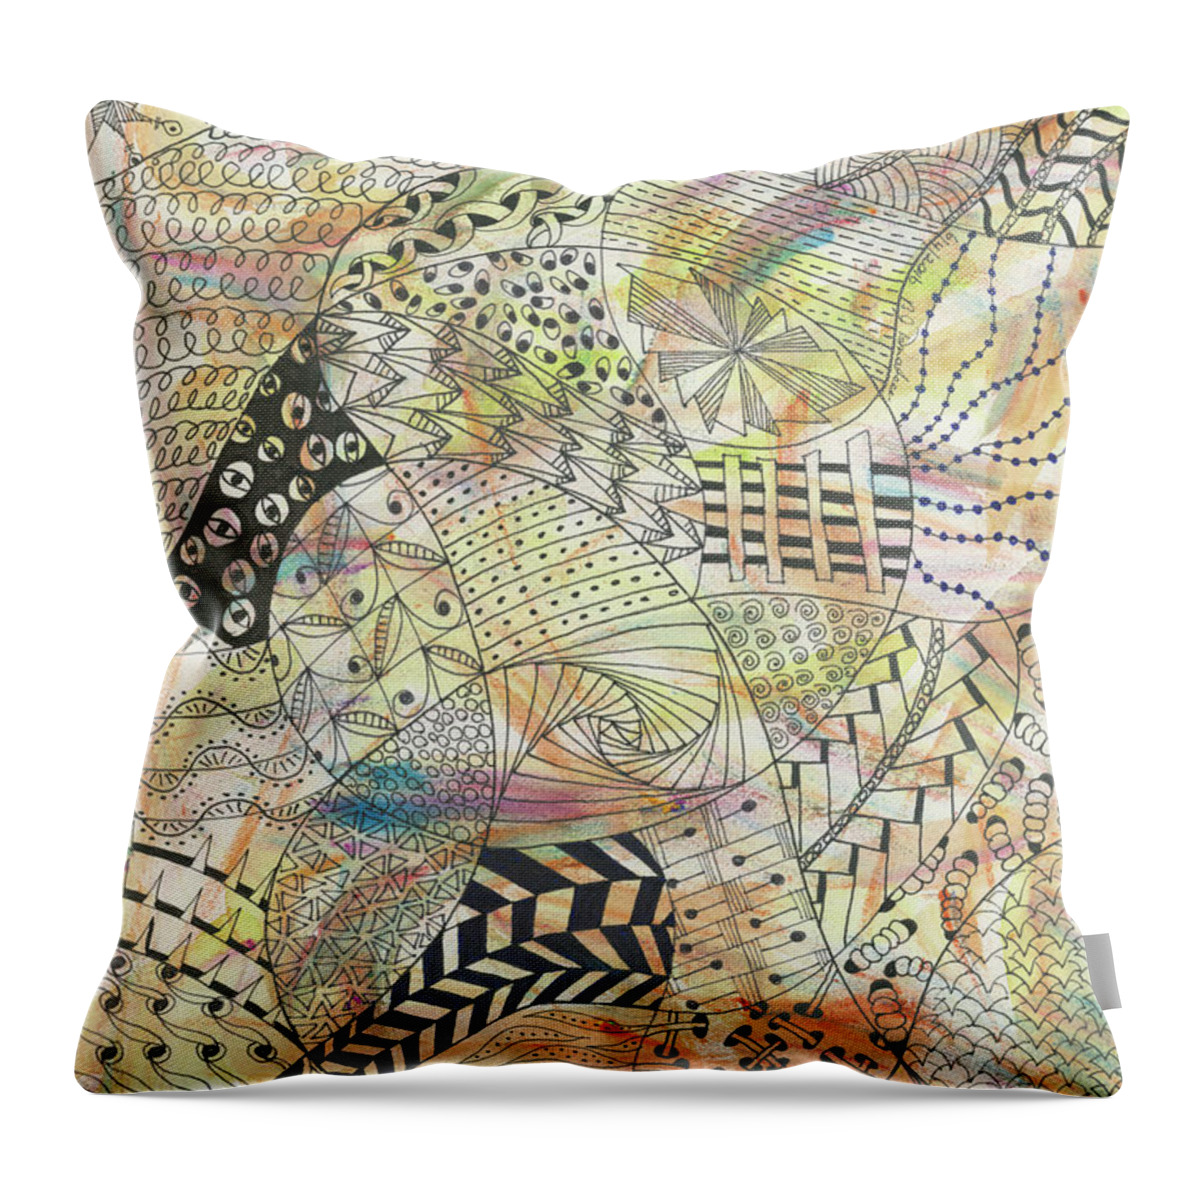 Zentangle Throw Pillow featuring the drawing Pinickity by Bev Donohoe